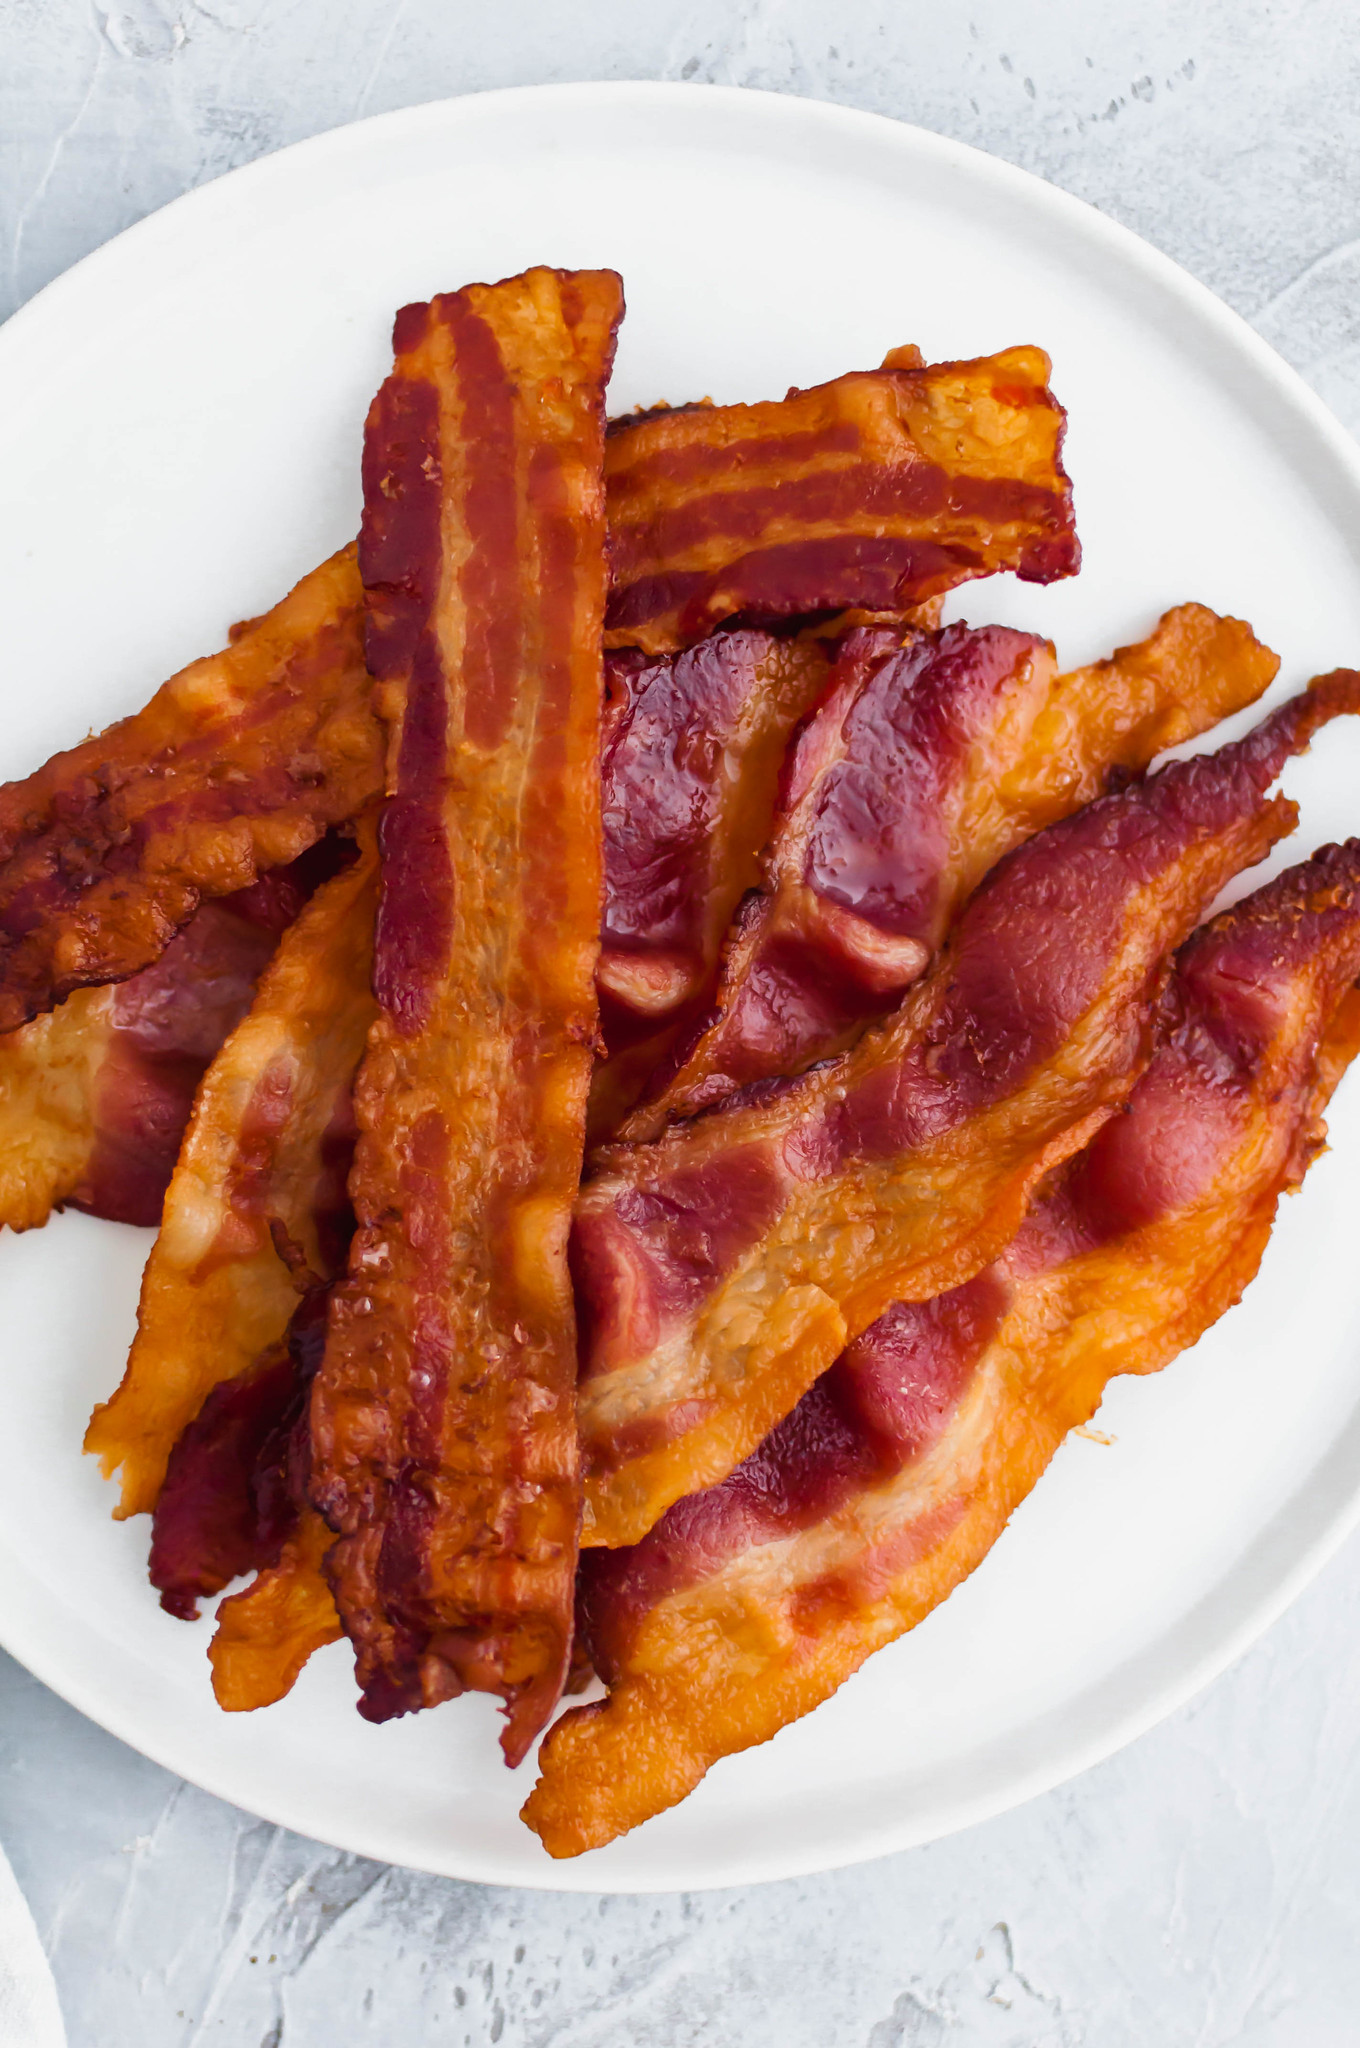 Today we're going to talk about How to Bake Bacon. It's the easiest and least messy way to prepare bacon and therefore my favorite. Read on for tips and tricks for the perfect way to prepare bacon.